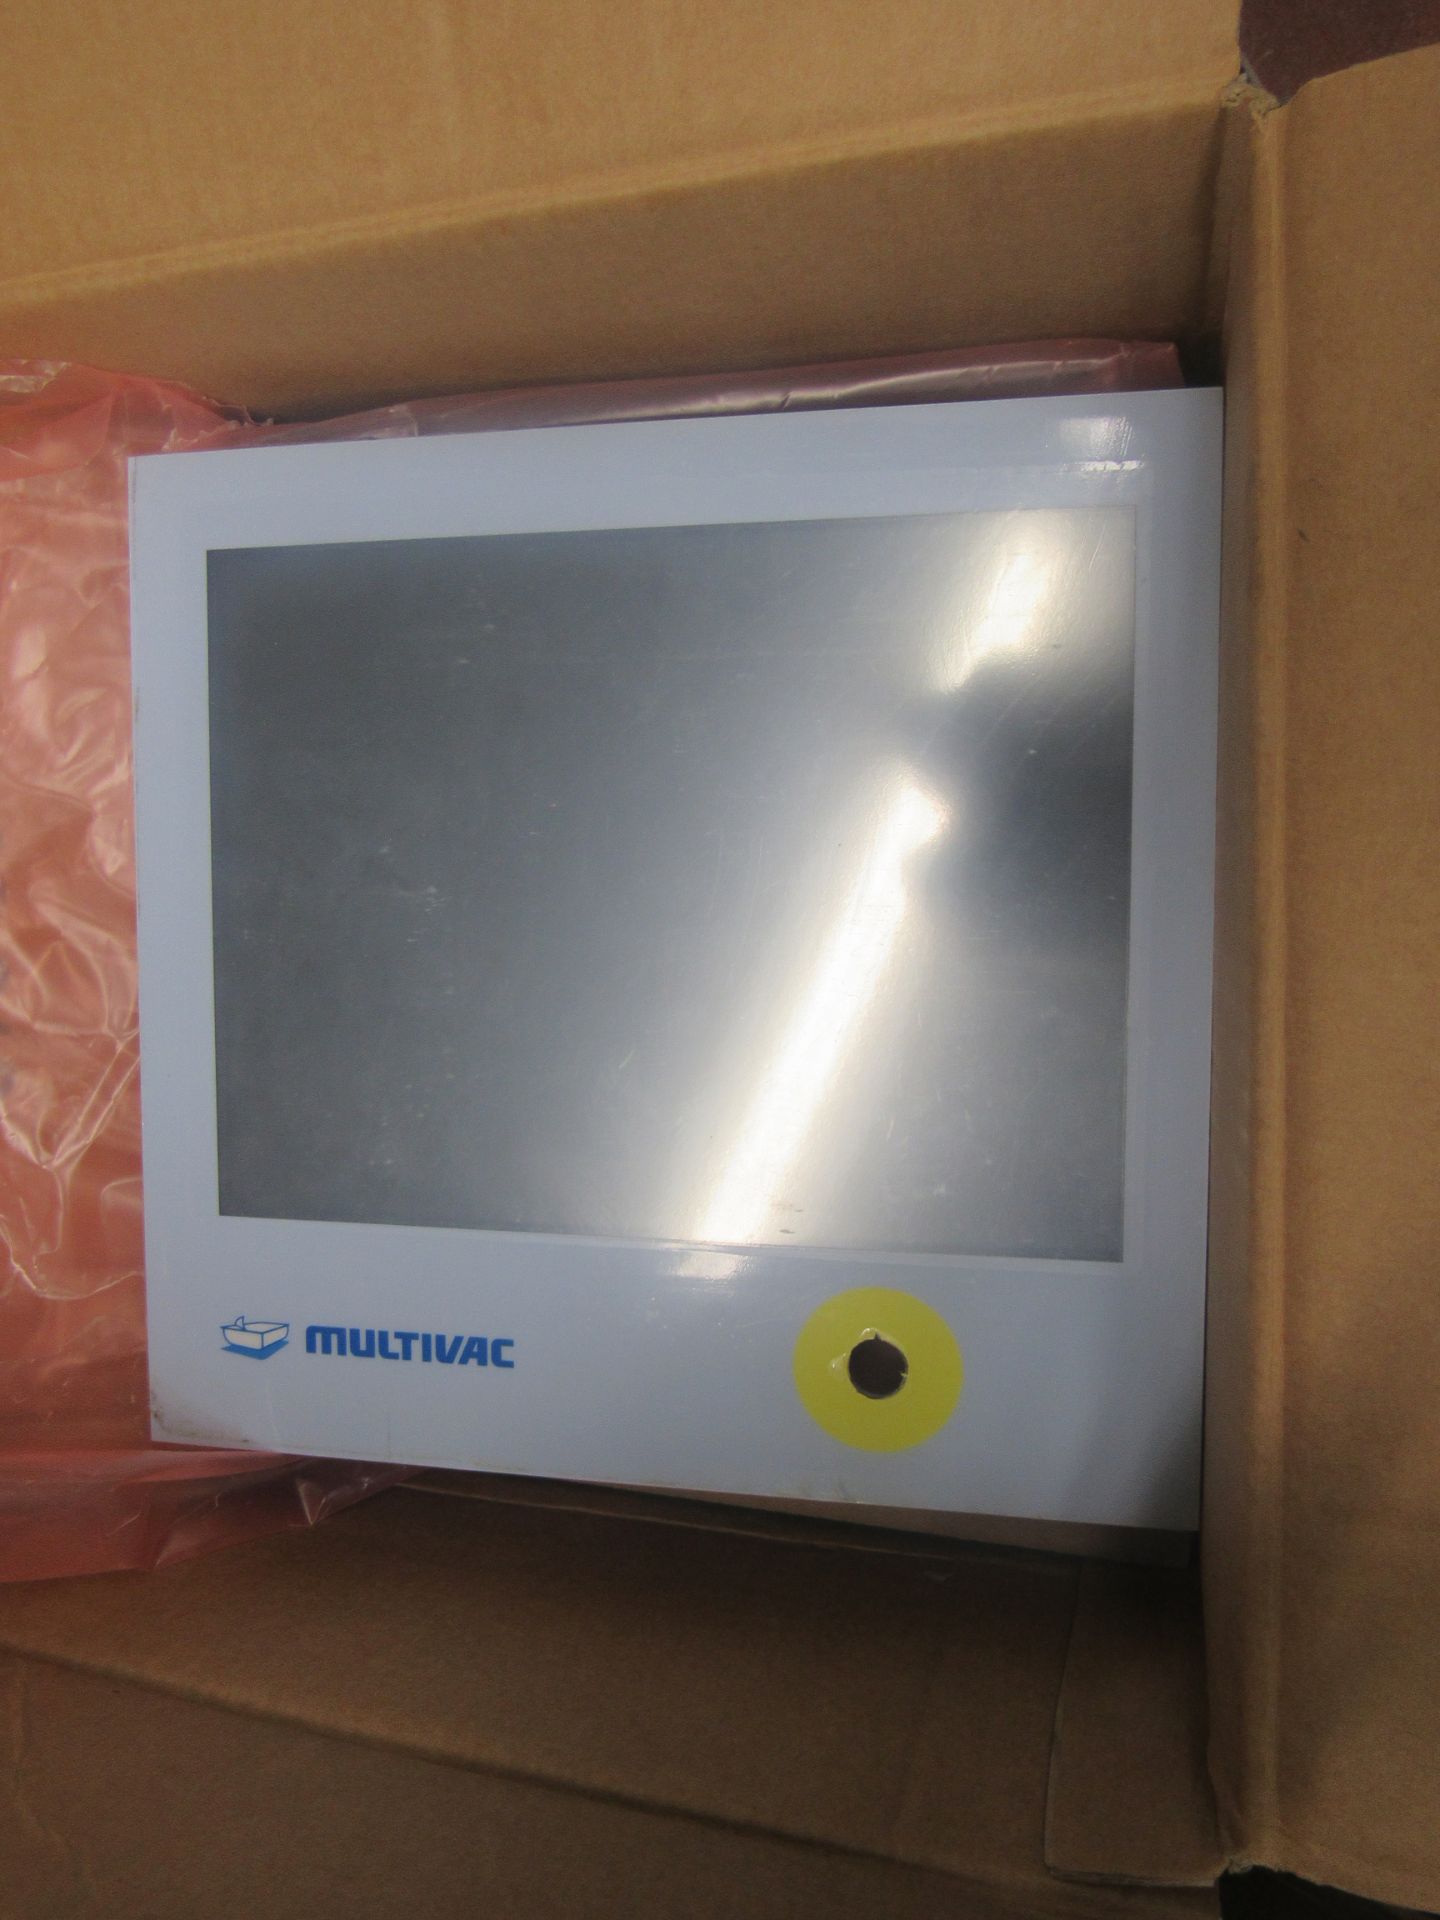 Multivac Touch Screen for line 5 or 6 new in box, Type Ventura Touch, Ser. #08102700003